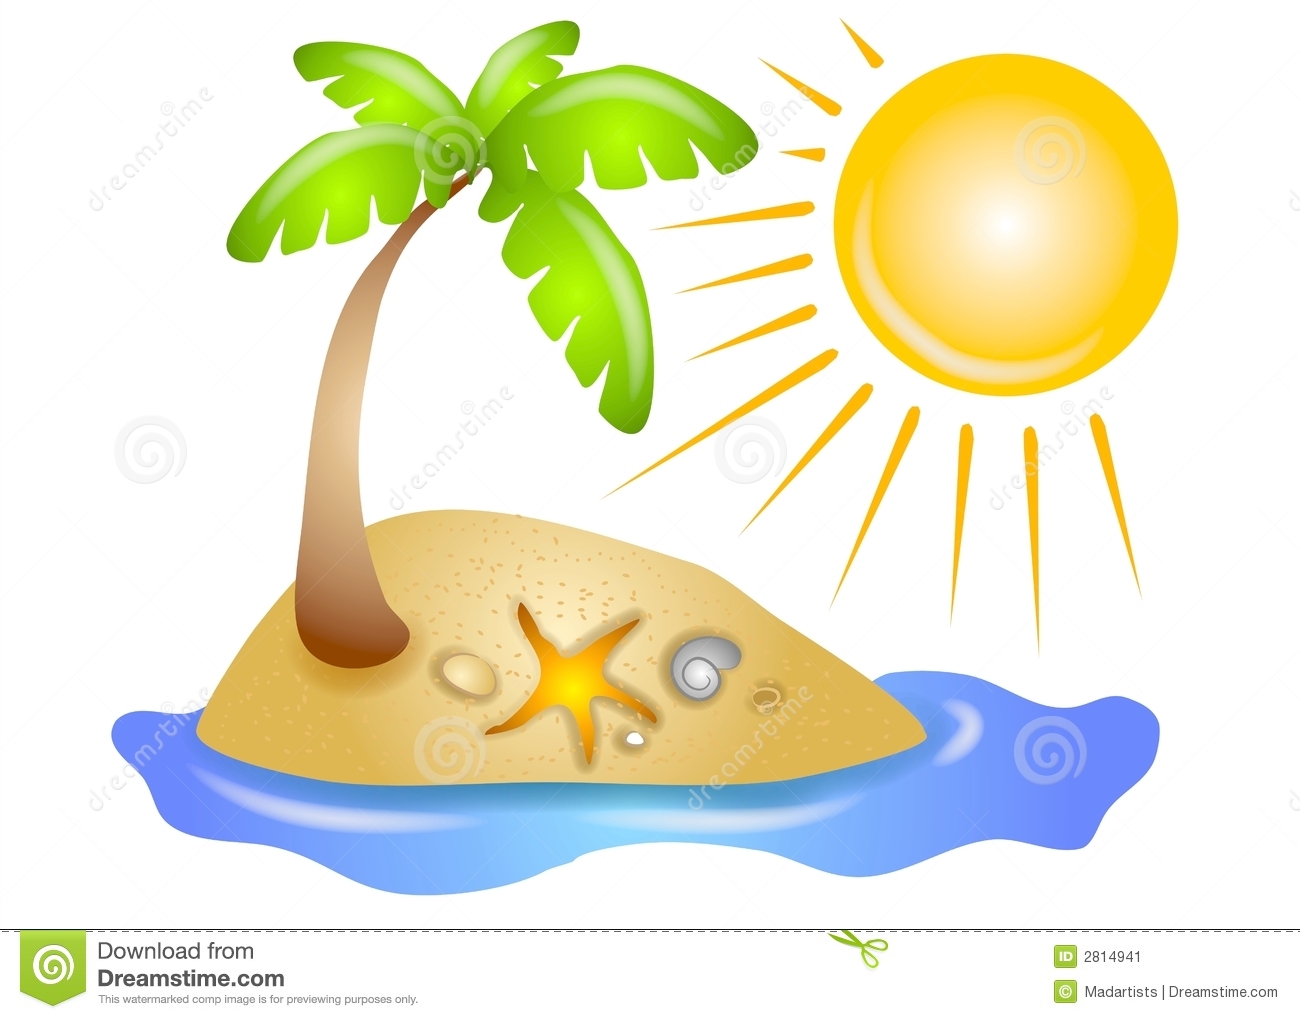 Islet clipart #8, Download drawings